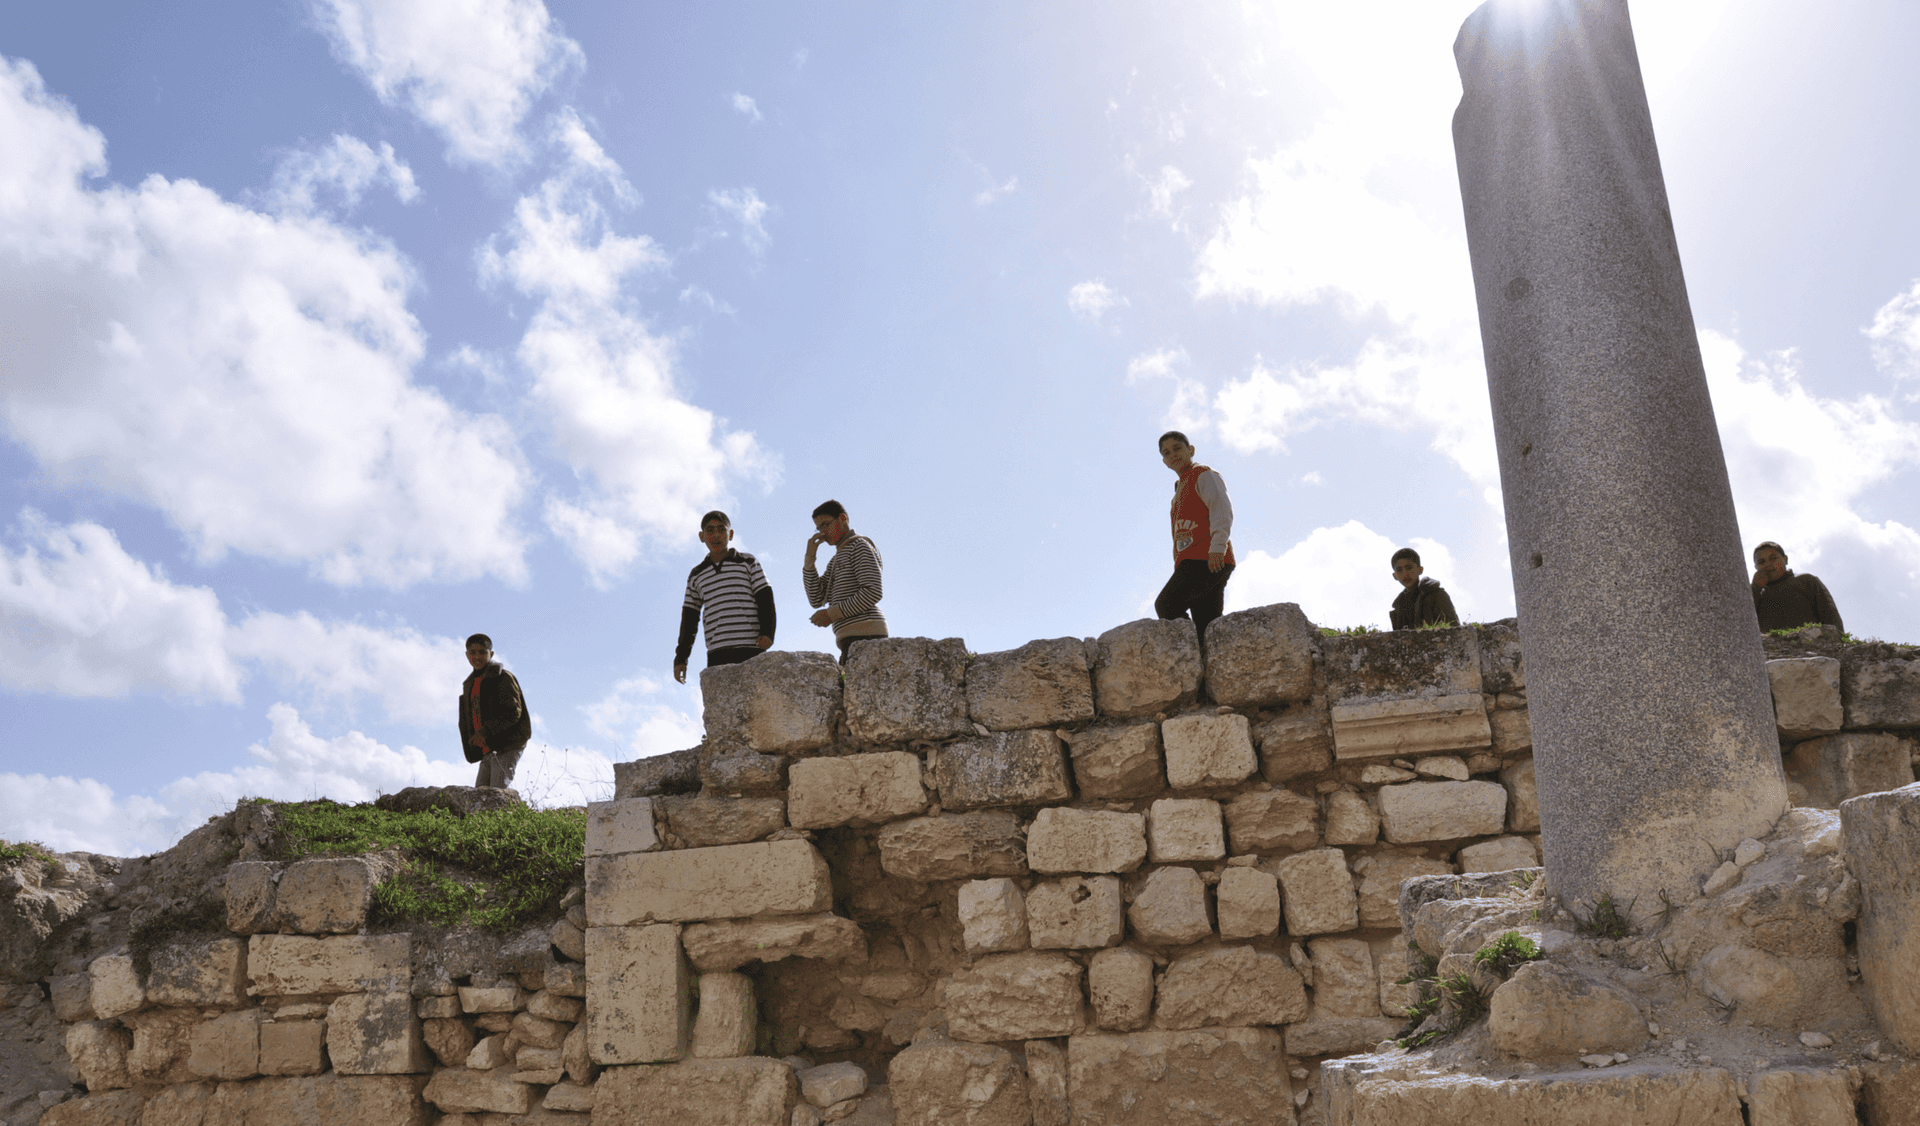 The preservation of cultural heritage in Palestine